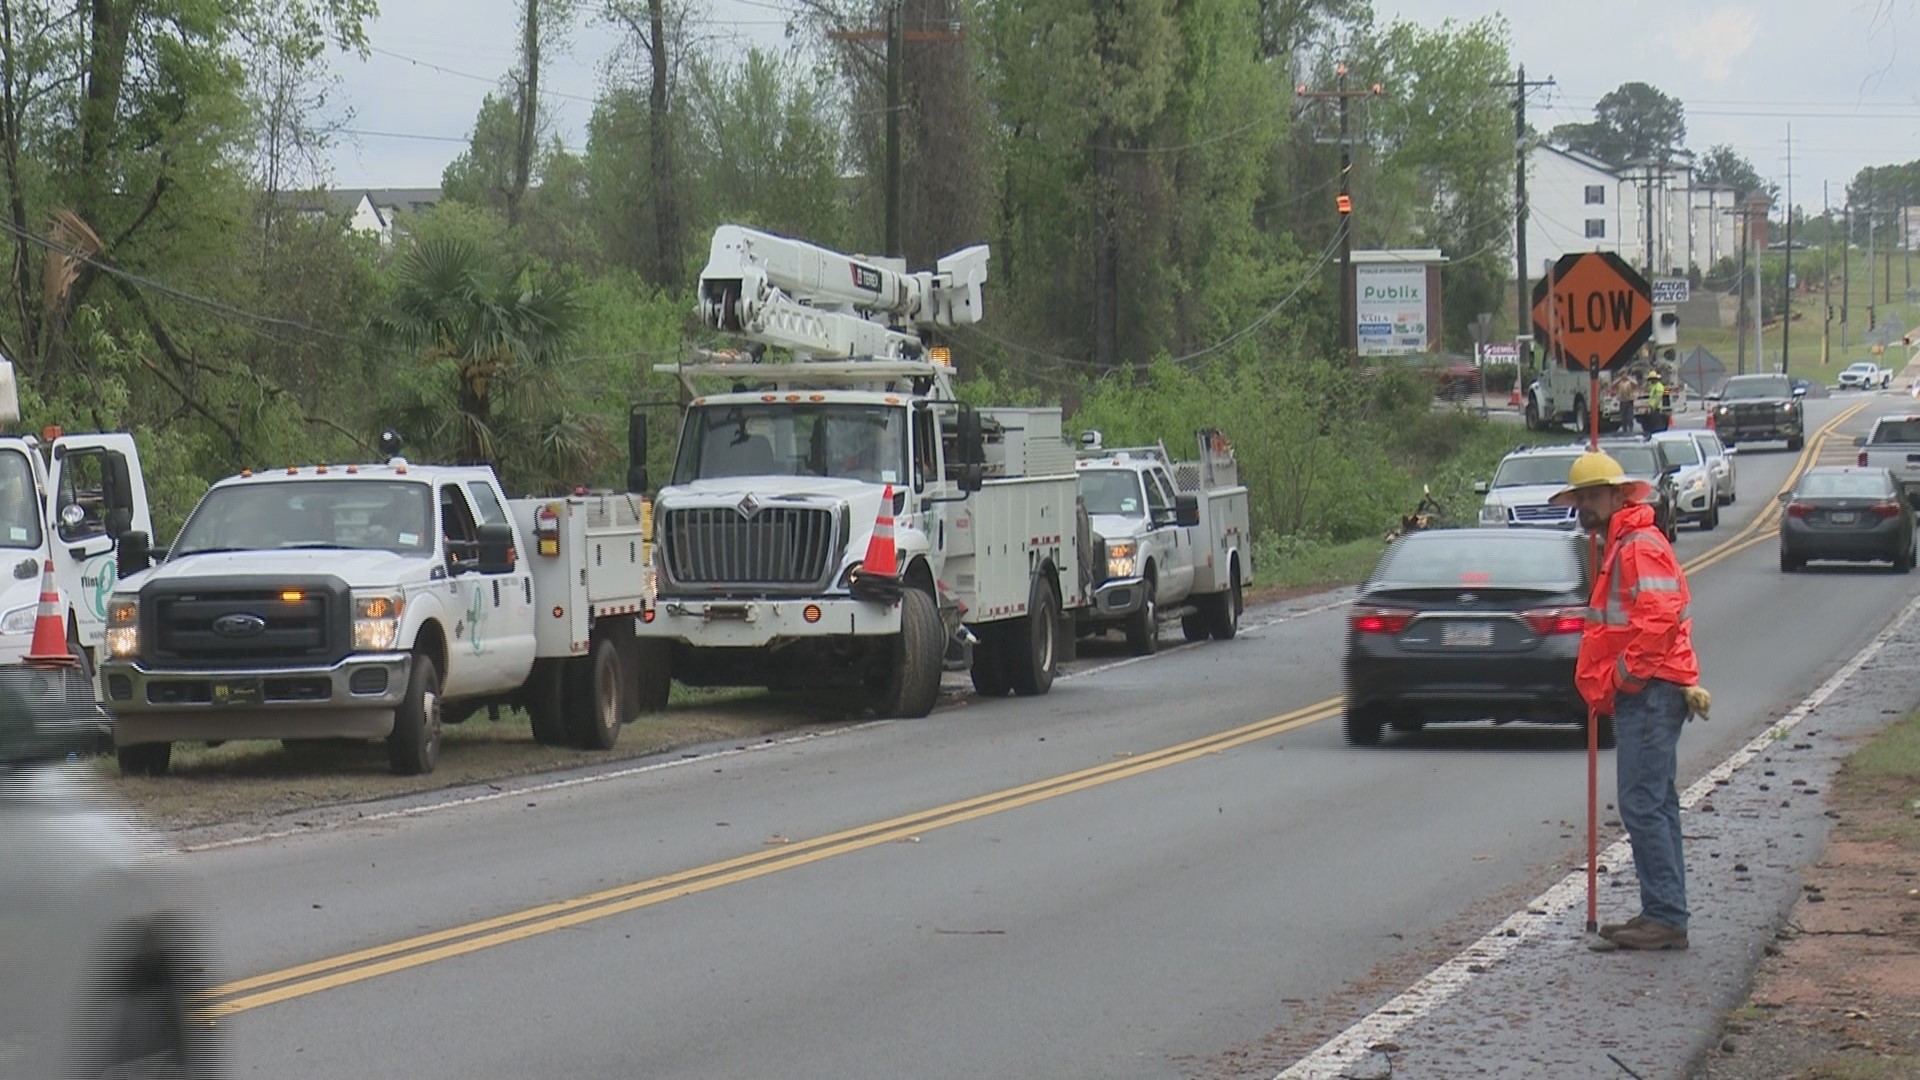 Flint Energies trucks throughout Highway 41 area after storm causes outages.